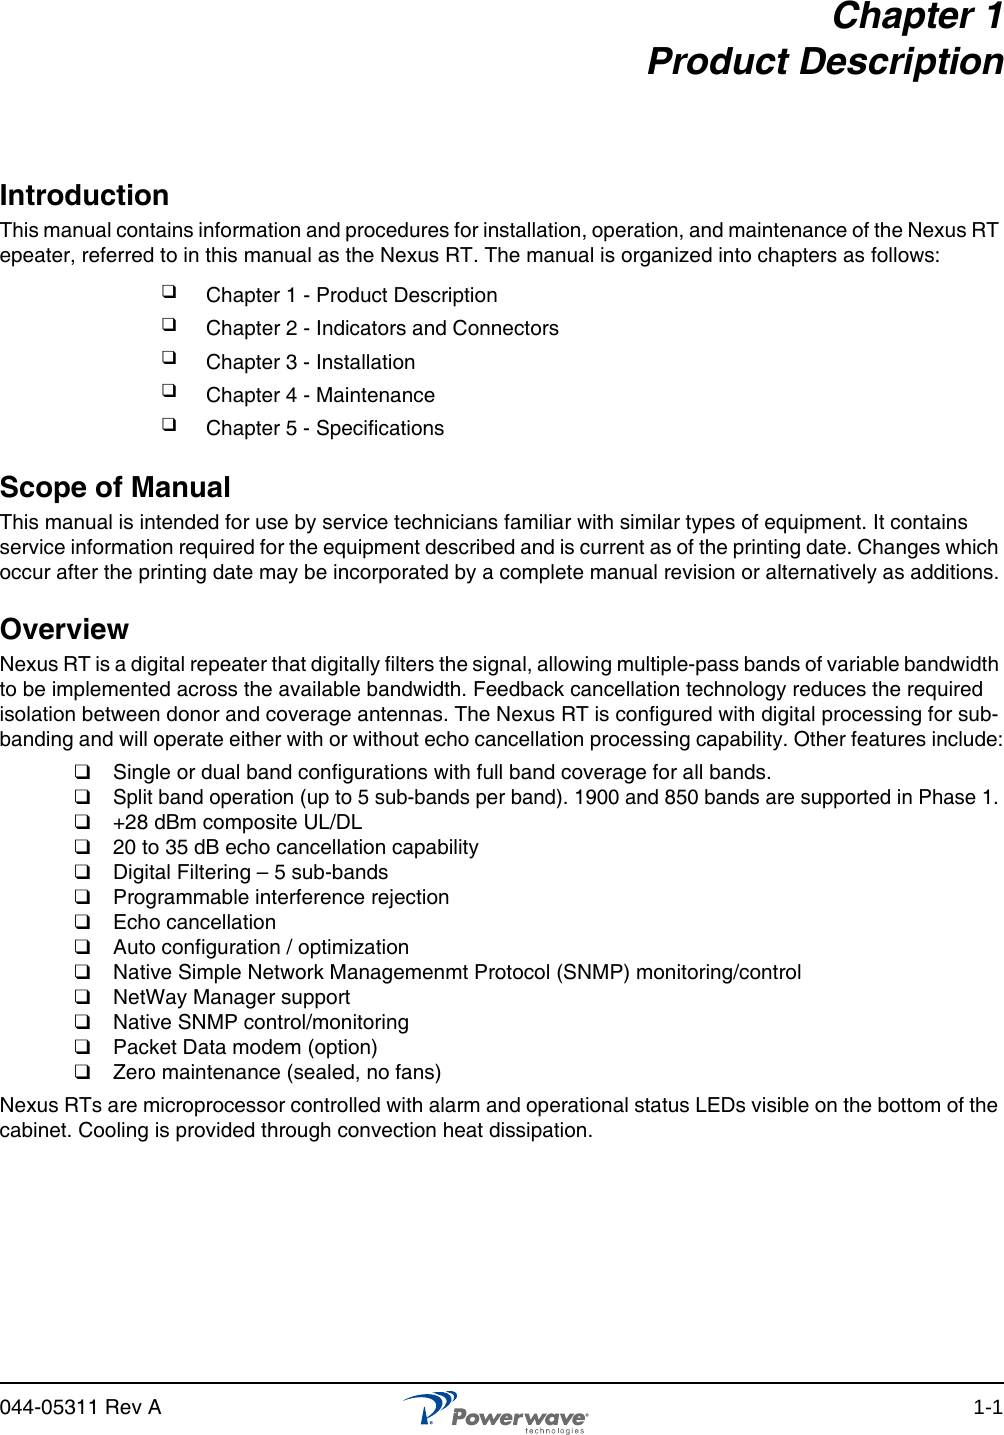 044-05311 Rev A 1-1Chapter 1 Product DescriptionIntroductionThis manual contains information and procedures for installation, operation, and maintenance of the Nexus RT epeater, referred to in this manual as the Nexus RT. The manual is organized into chapters as follows:Scope of ManualThis manual is intended for use by service technicians familiar with similar types of equipment. It contains service information required for the equipment described and is current as of the printing date. Changes which occur after the printing date may be incorporated by a complete manual revision or alternatively as additions.Overview Nexus RT is a digital repeater that digitally filters the signal, allowing multiple-pass bands of variable bandwidth to be implemented across the available bandwidth. Feedback cancellation technology reduces the required isolation between donor and coverage antennas. The Nexus RT is configured with digital processing for sub-banding and will operate either with or without echo cancellation processing capability. Other features include:❑  Single or dual band configurations with full band coverage for all bands.❑  Split band operation (up to 5 sub-bands per band). 1900 and 850 bands are supported in Phase 1.❑  +28 dBm composite UL/DL❑  20 to 35 dB echo cancellation capability❑  Digital Filtering – 5 sub-bands❑  Programmable interference rejection❑  Echo cancellation❑  Auto configuration / optimization❑  Native Simple Network Managemenmt Protocol (SNMP) monitoring/control❑  NetWay Manager support ❑  Native SNMP control/monitoring❑  Packet Data modem (option)❑  Zero maintenance (sealed, no fans)Nexus RTs are microprocessor controlled with alarm and operational status LEDs visible on the bottom of the cabinet. Cooling is provided through convection heat dissipation.❑Chapter 1 - Product Description❑Chapter 2 - Indicators and Connectors❑Chapter 3 - Installation❑Chapter 4 - Maintenance❑Chapter 5 - Specifications